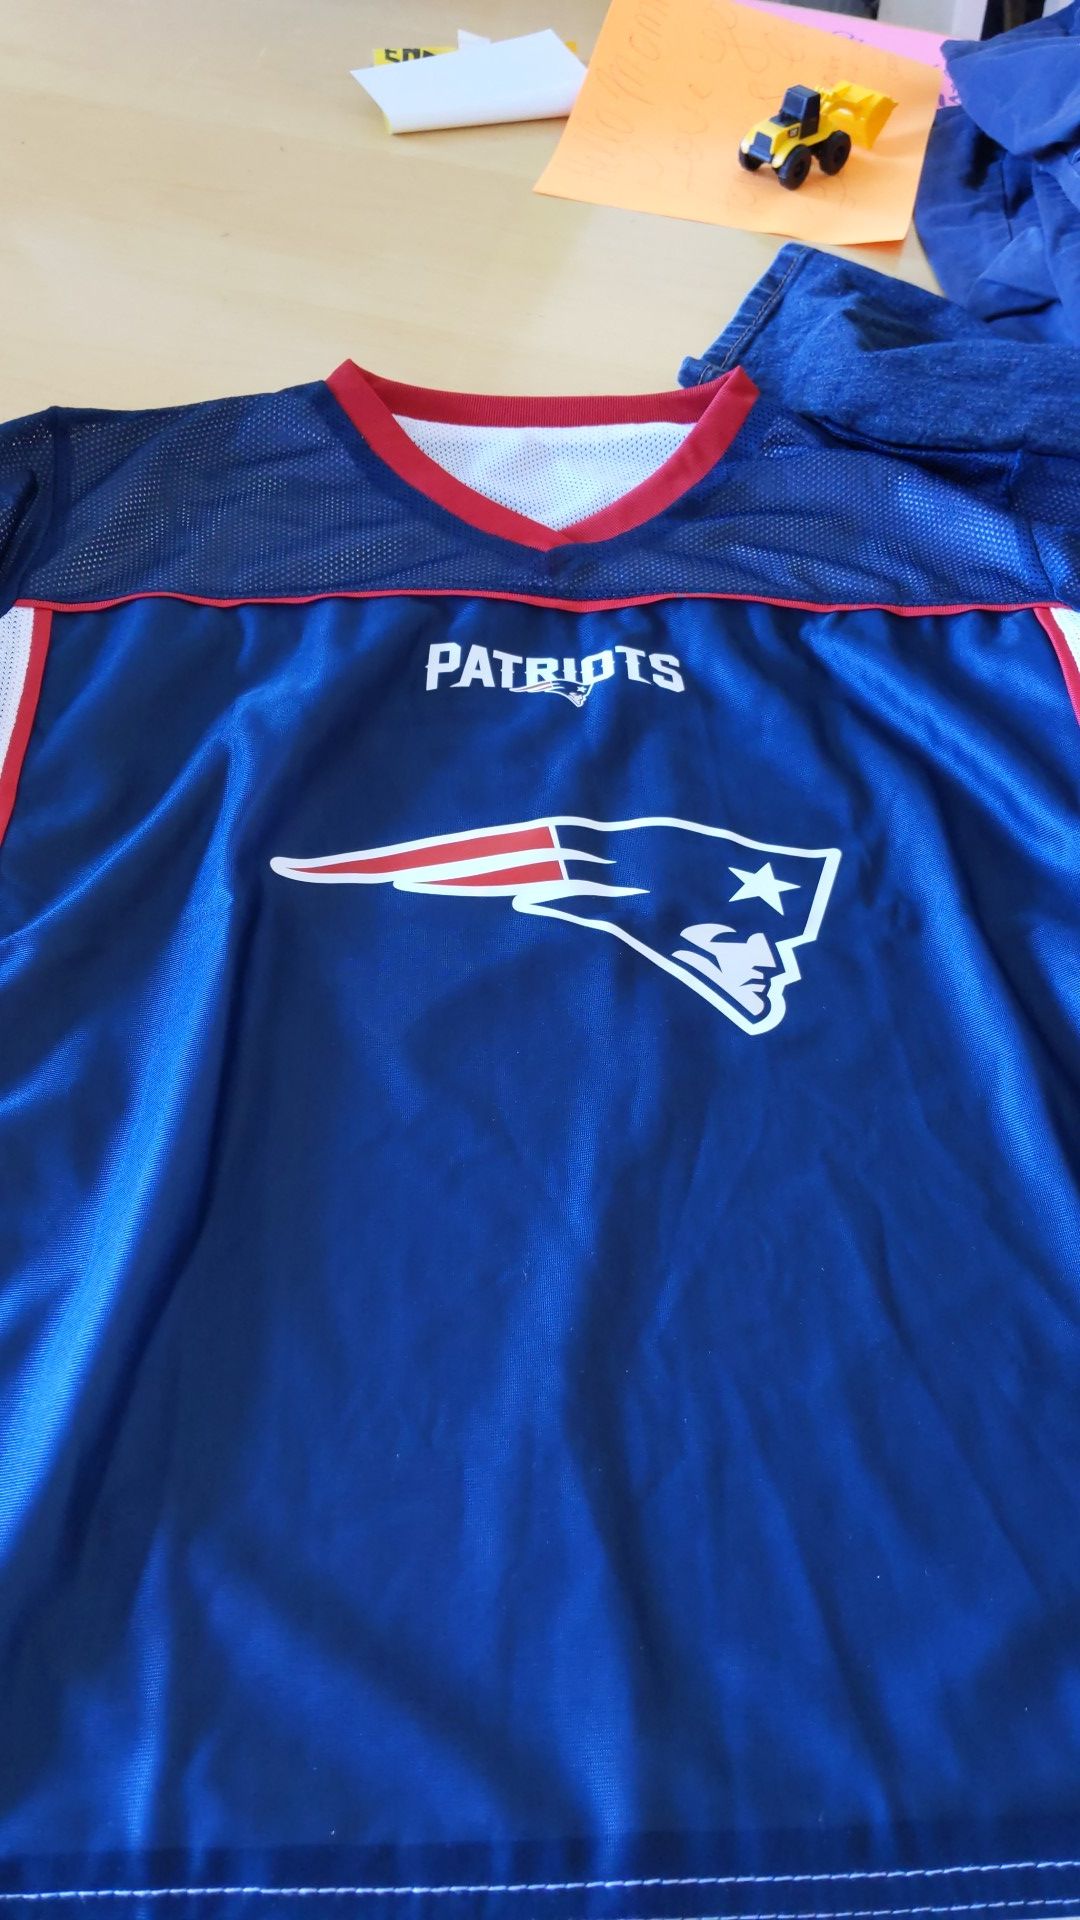 Reversible Jersey youth XL flag football New England Patriots